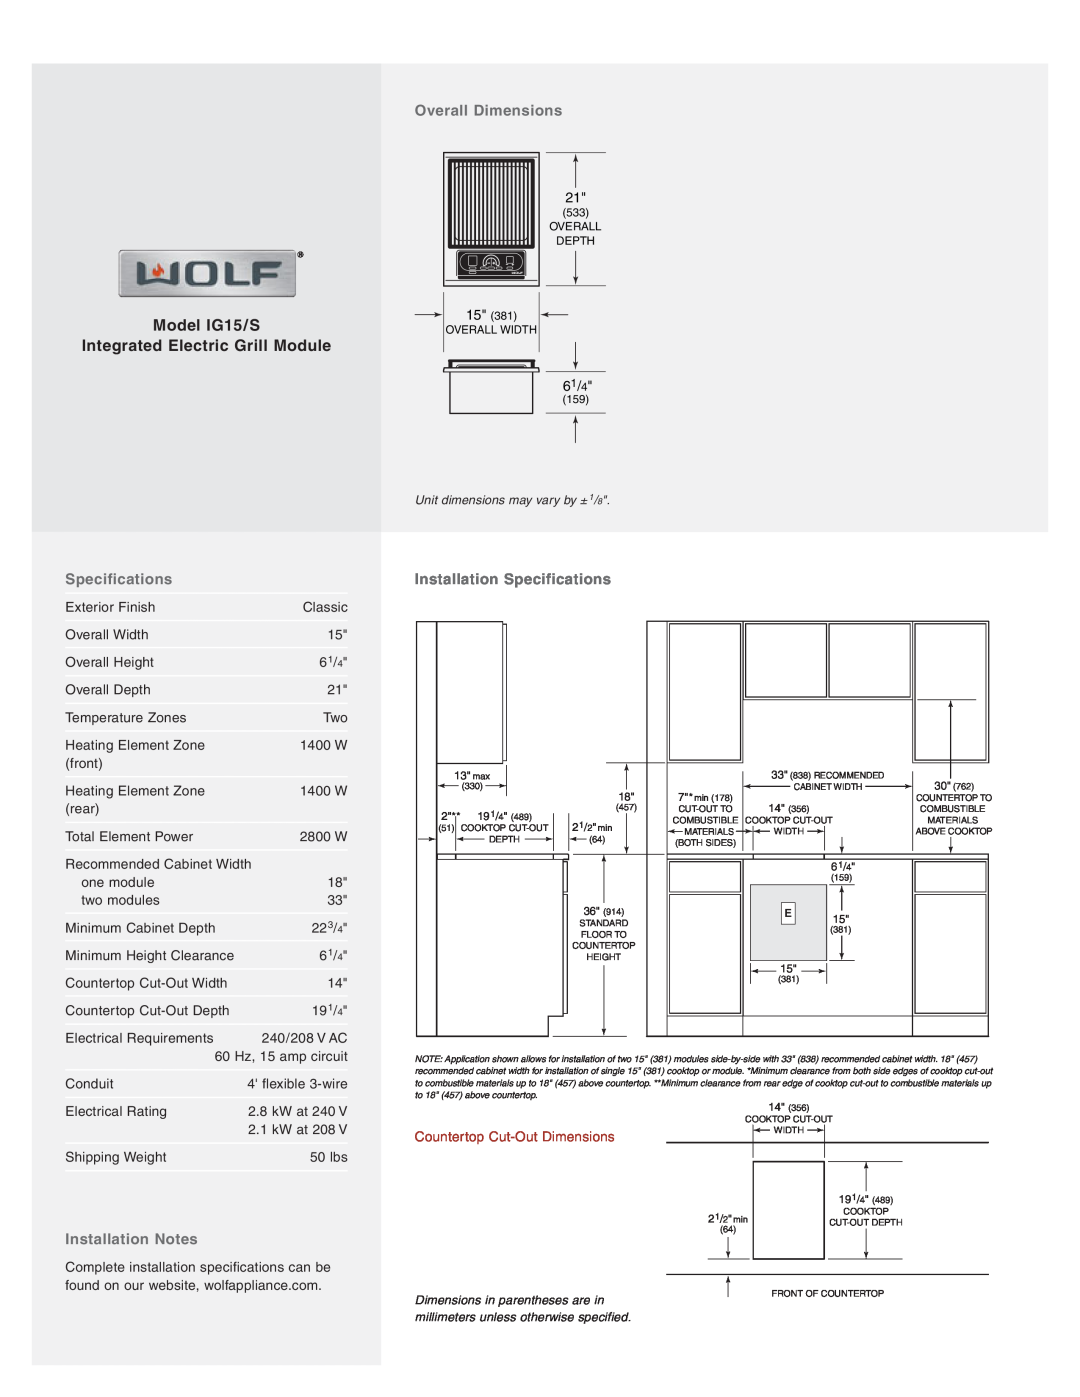 Wolf Appliance Company IG15/S manual Overall Dimensions, Installation Specifications, Installation Notes, 61/4 